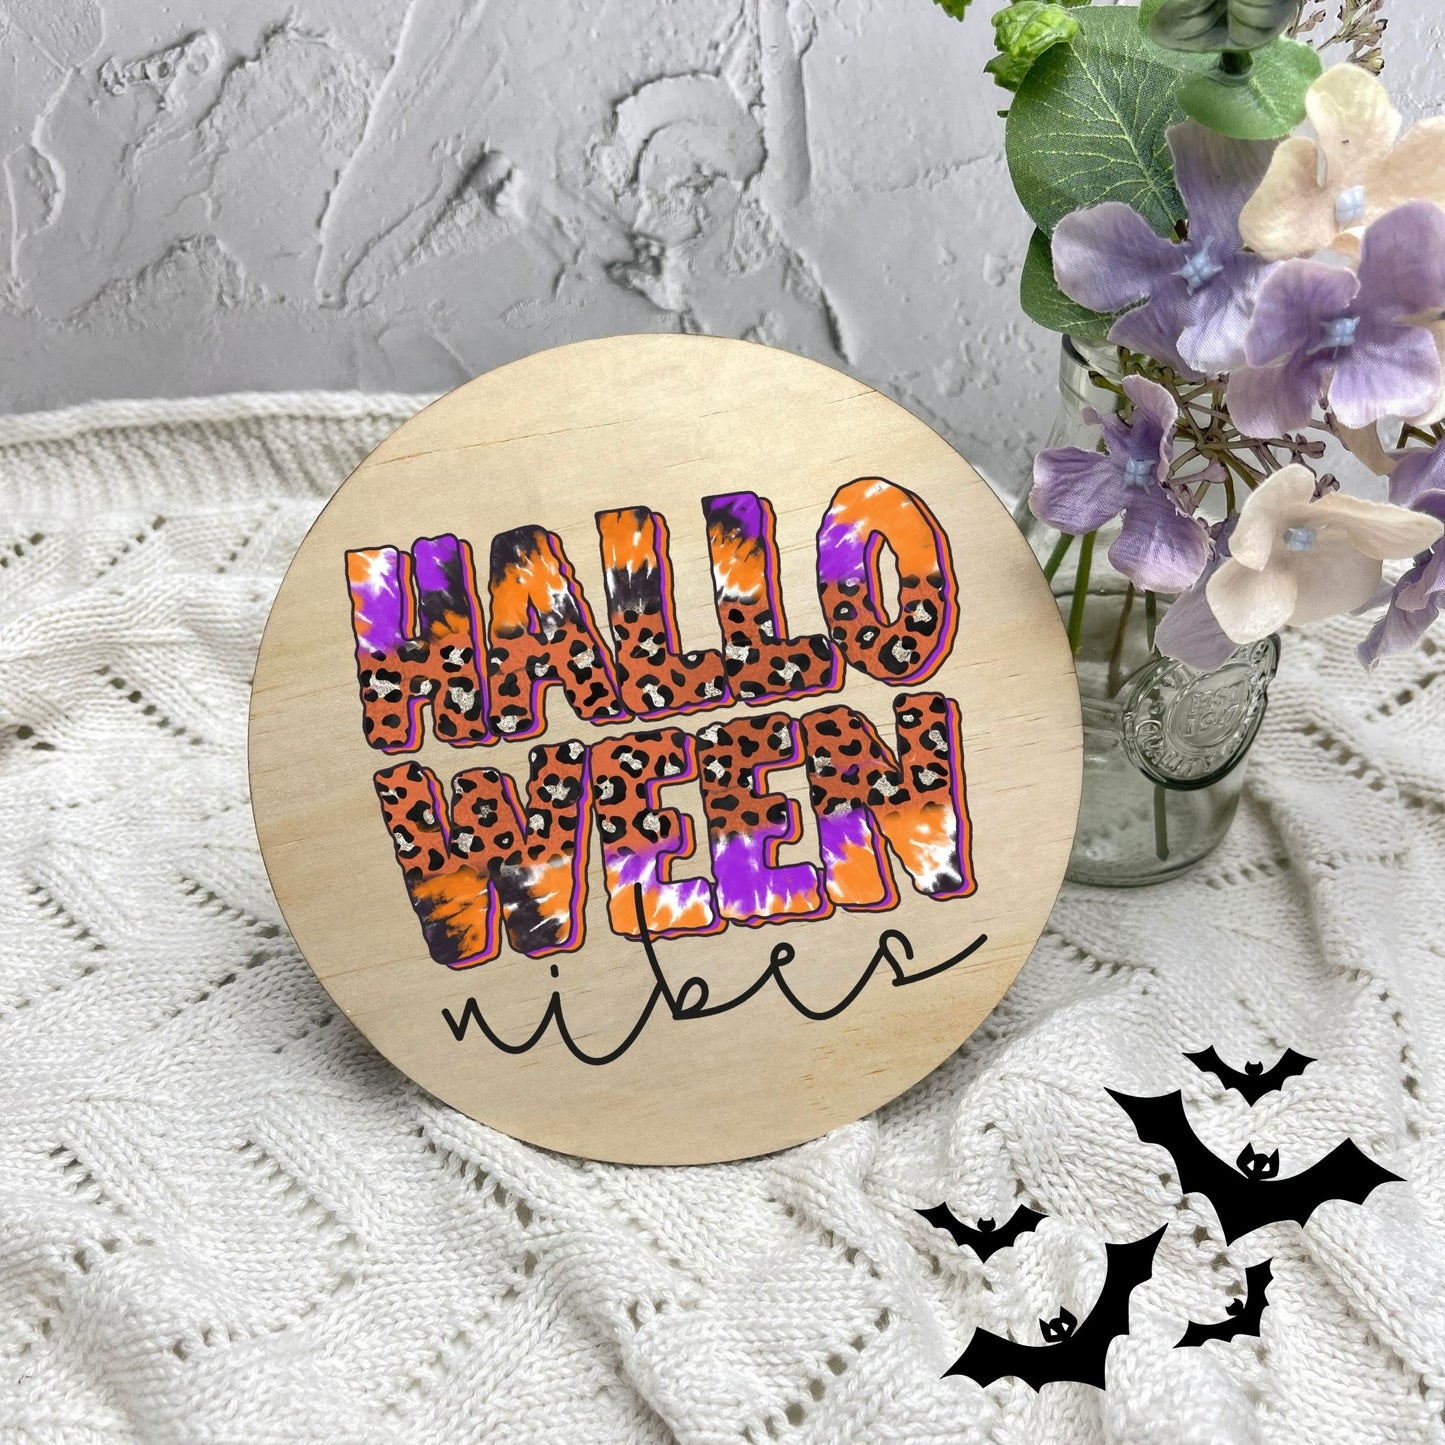 Halloween Vibes sign, Halloween Decor, Spooky Vibes, hocus pocus sign, trick or treat decor, haunted house h4